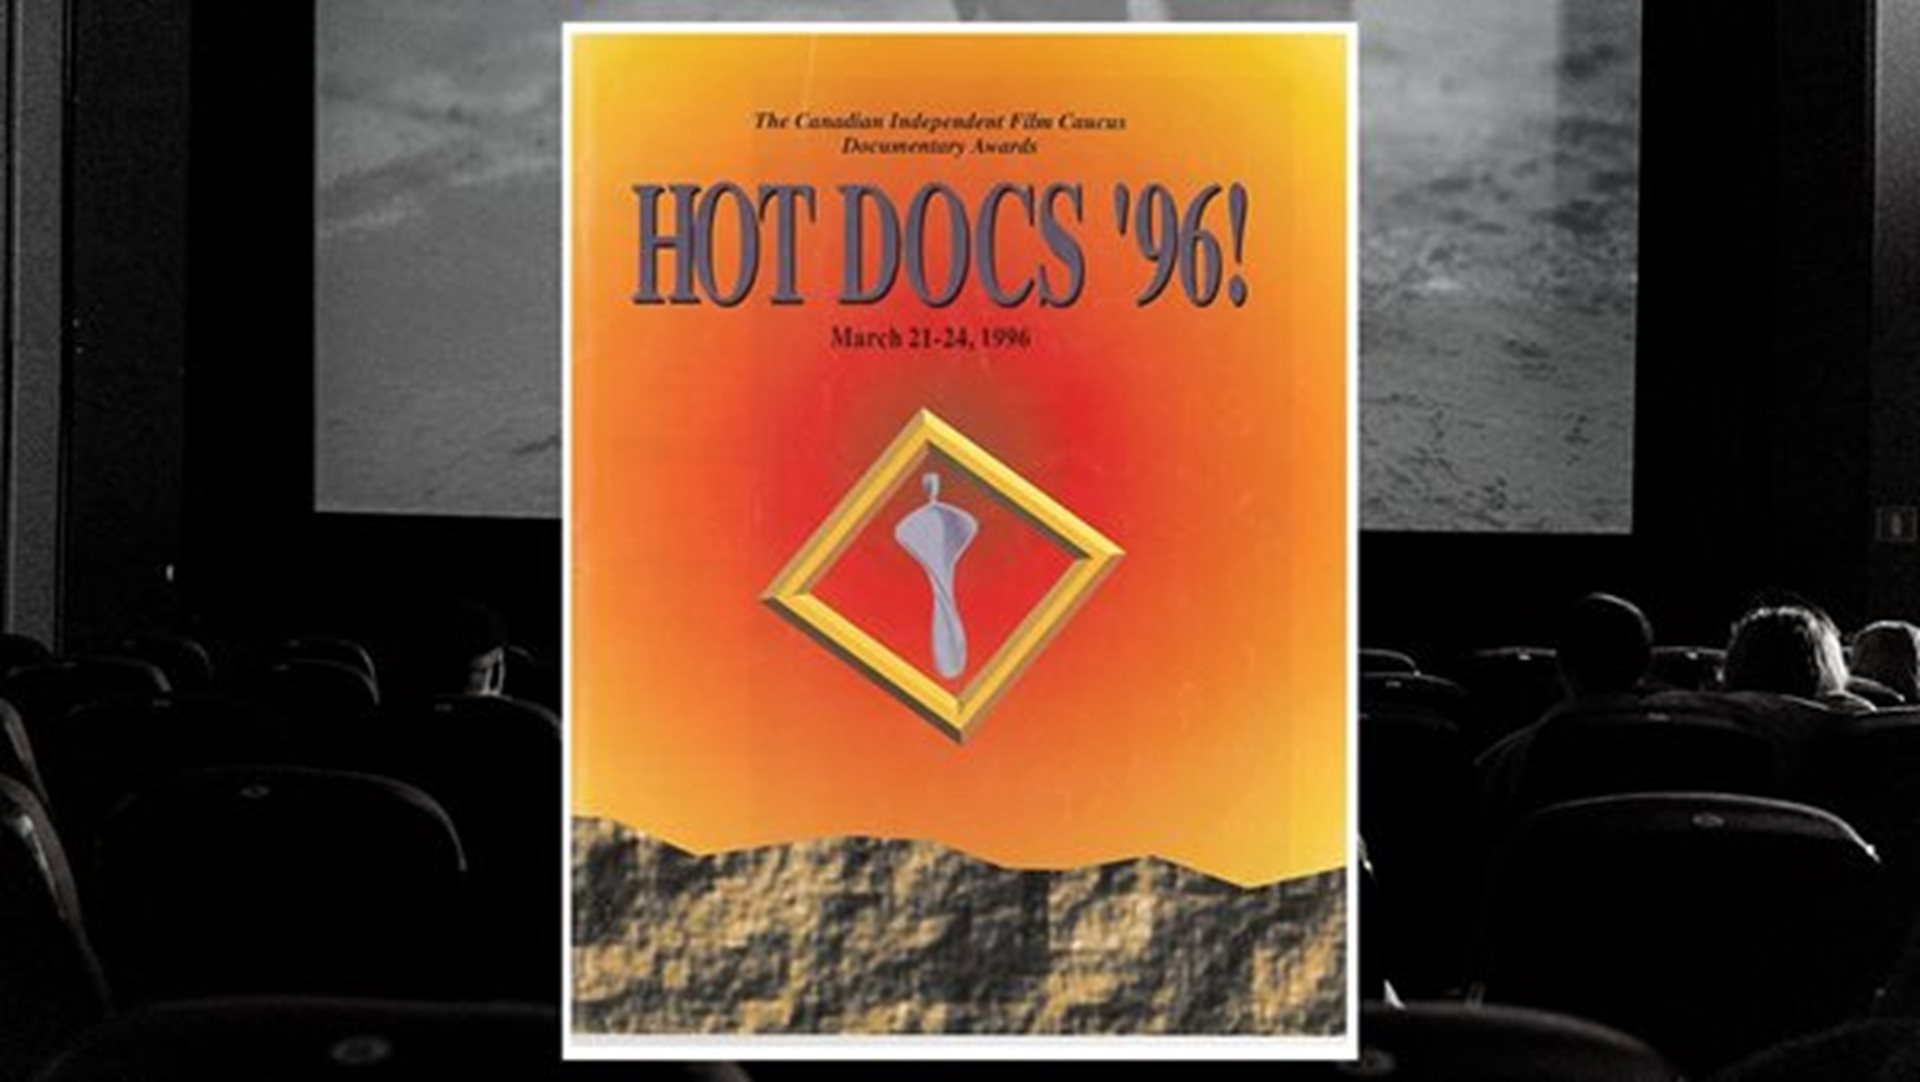 Hot Docs 1996 poster overlaying a black and white indoor cinema image